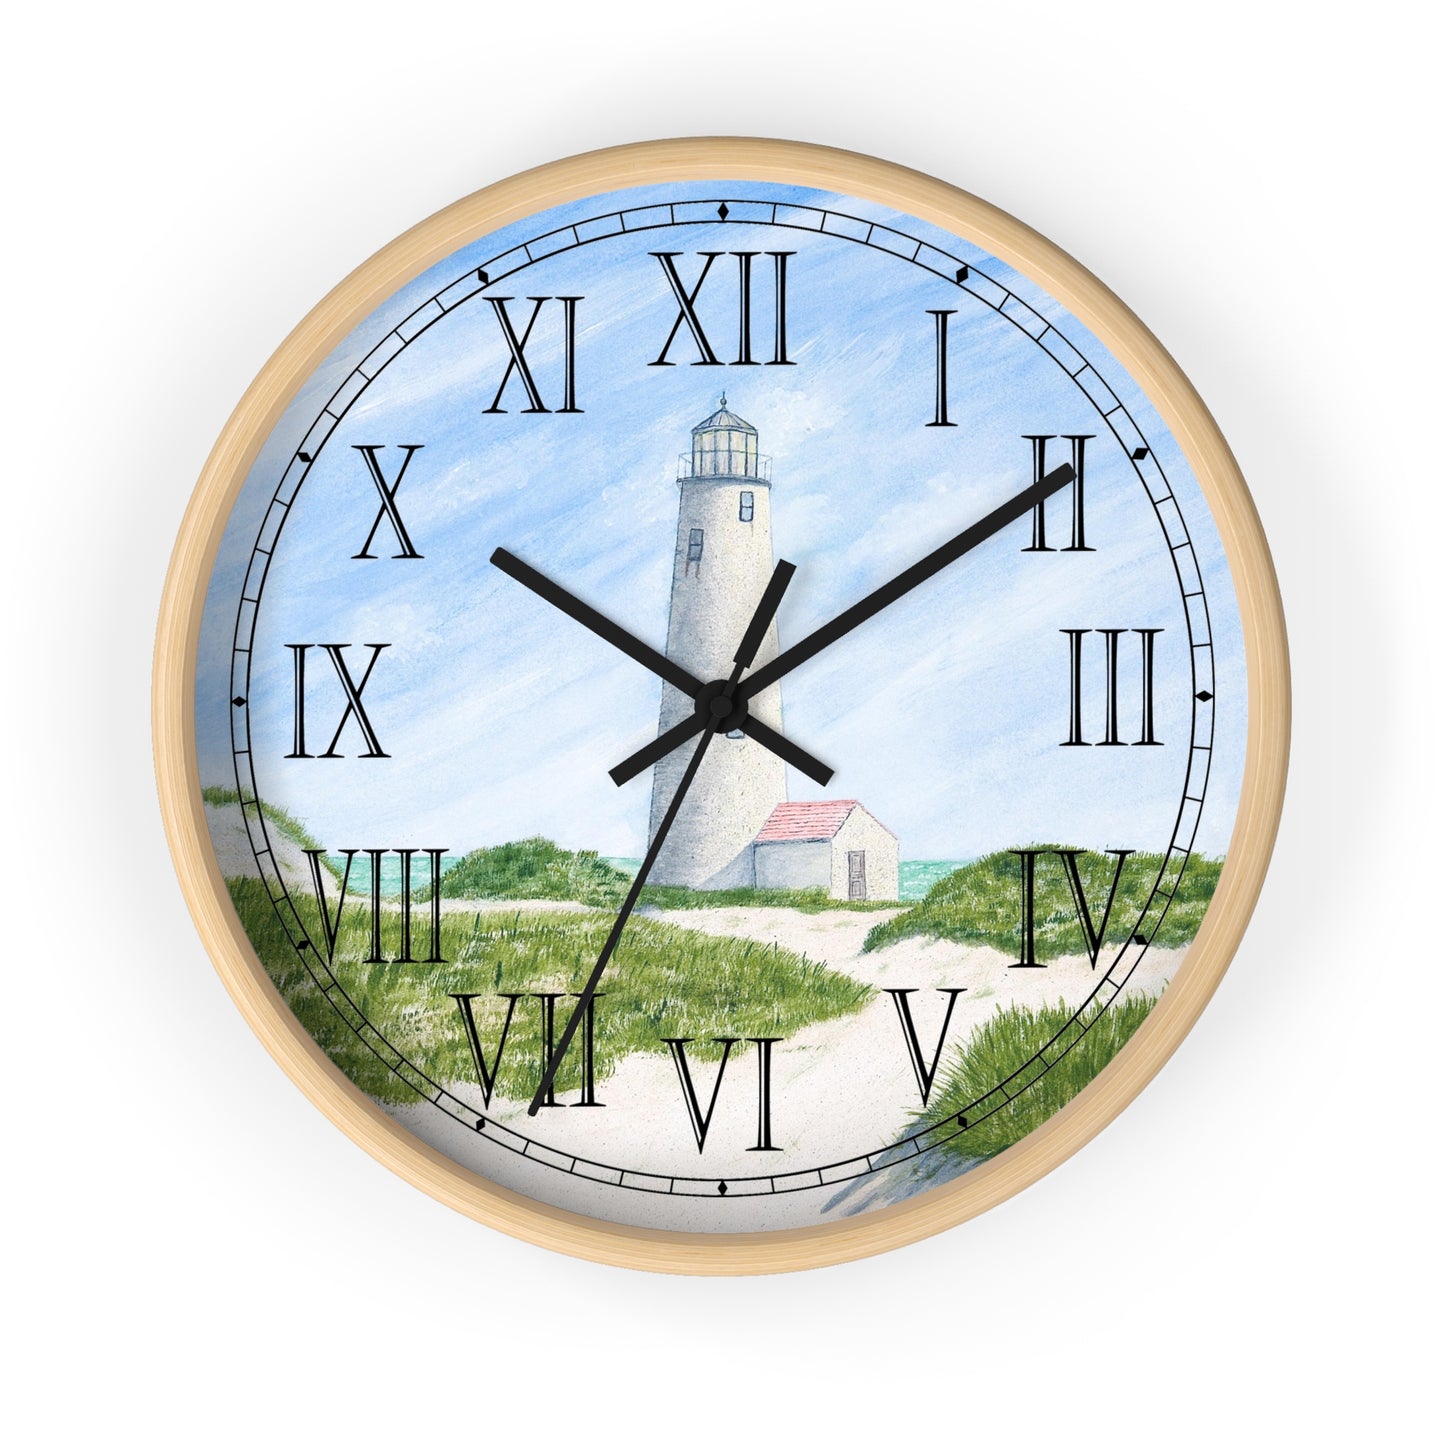 A charming Nantucket Lighthouse Roman Numeral Clock to add a special touch to your home. Great gift for lighthouse fans!